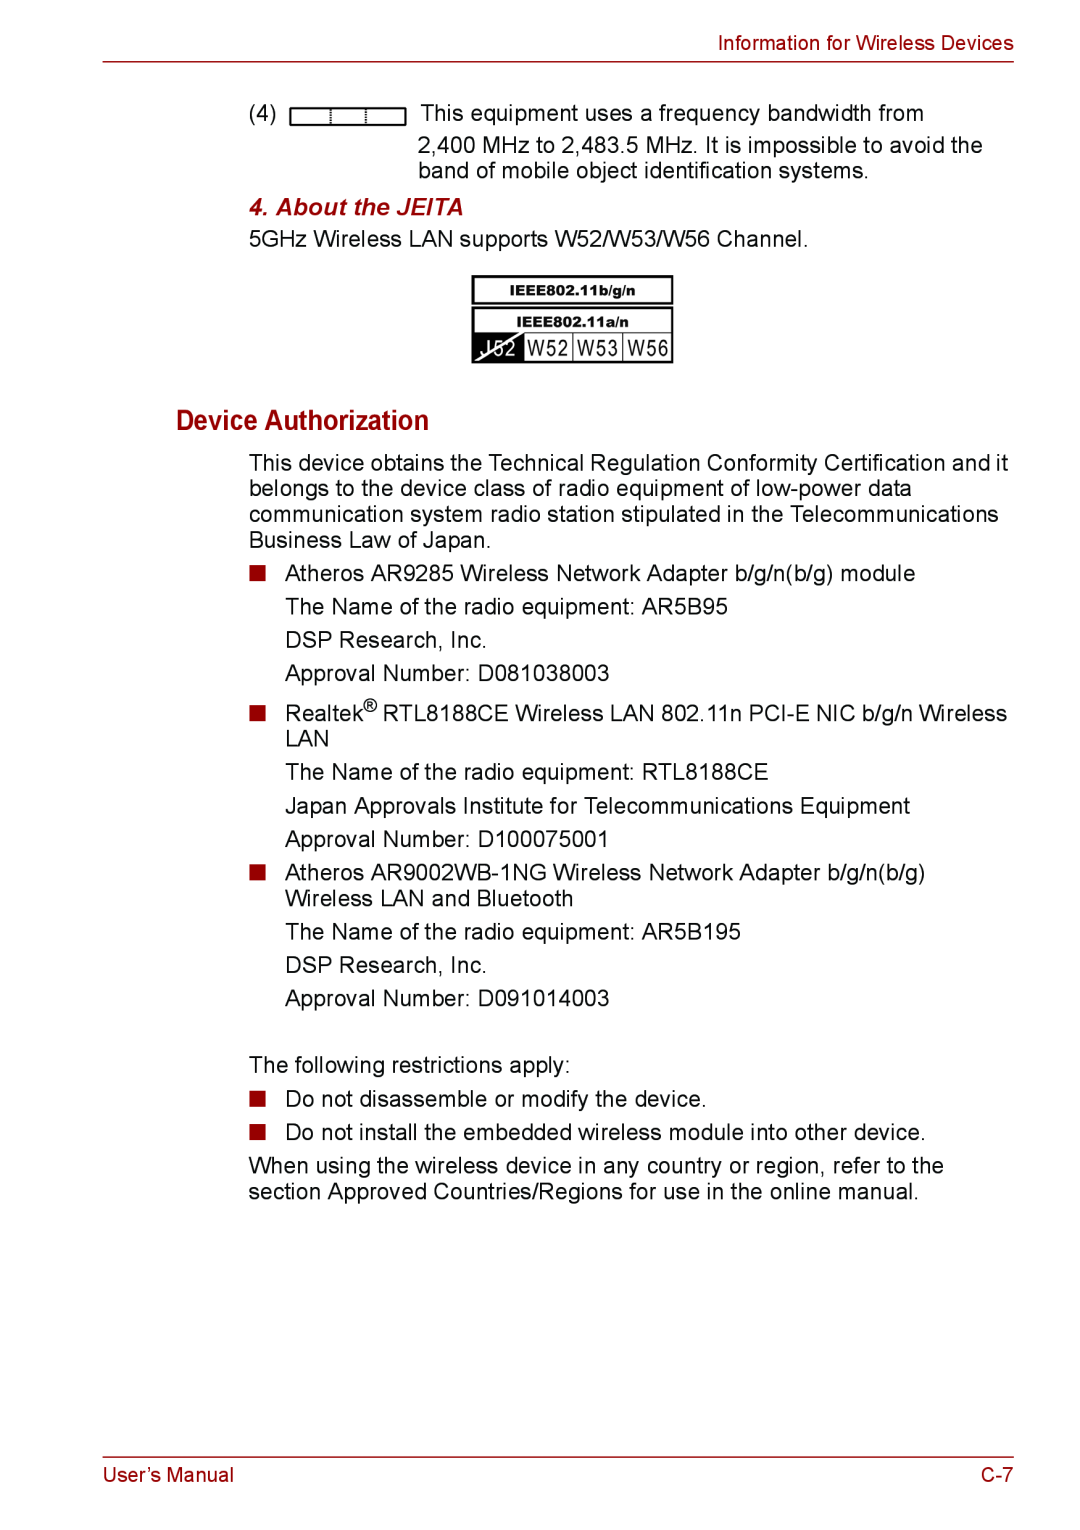 Toshiba PSC08U-02D01D user manual Device Authorization, About the JEITA 